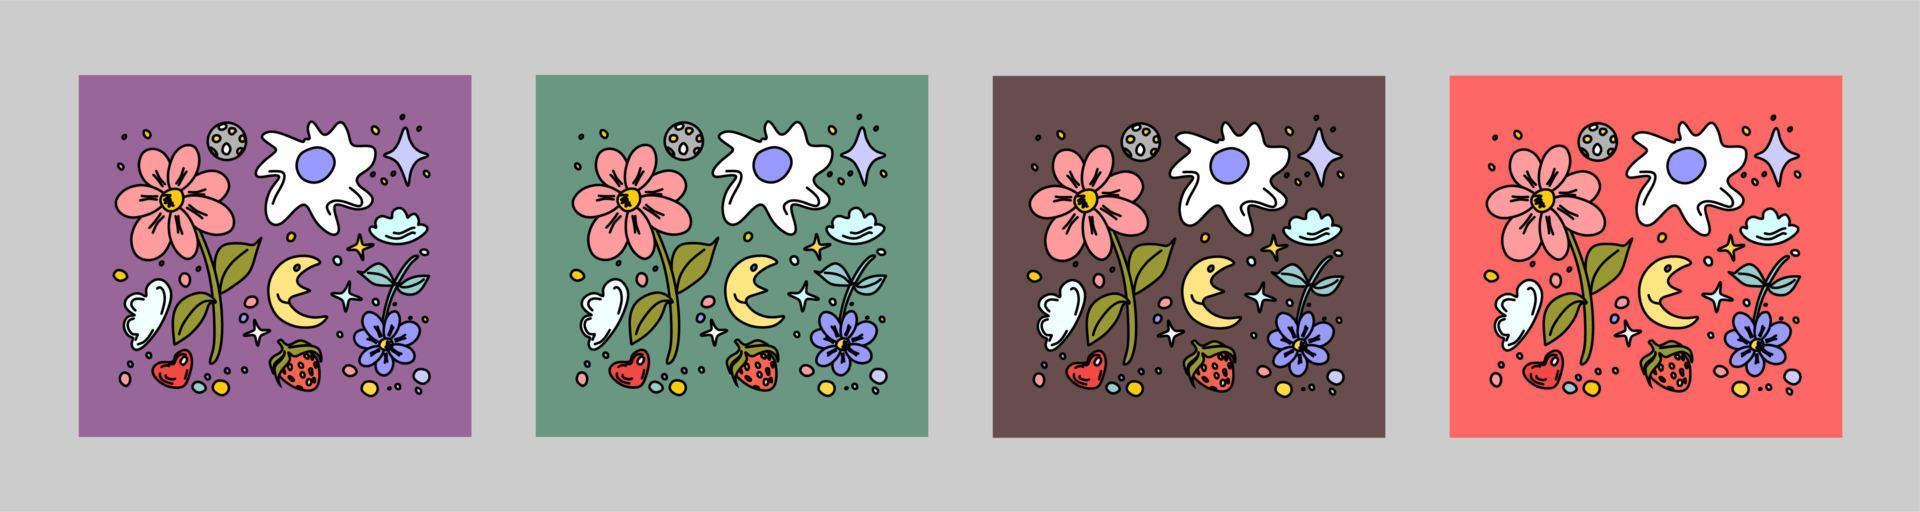 The mood is romantic, aesthetic. Flowers, moons, clouds, crystals, strawberries, hearts and stars.Retro style. Drawing by hand.A set of cute little things on a pink, gray-brown, green,purple. vector